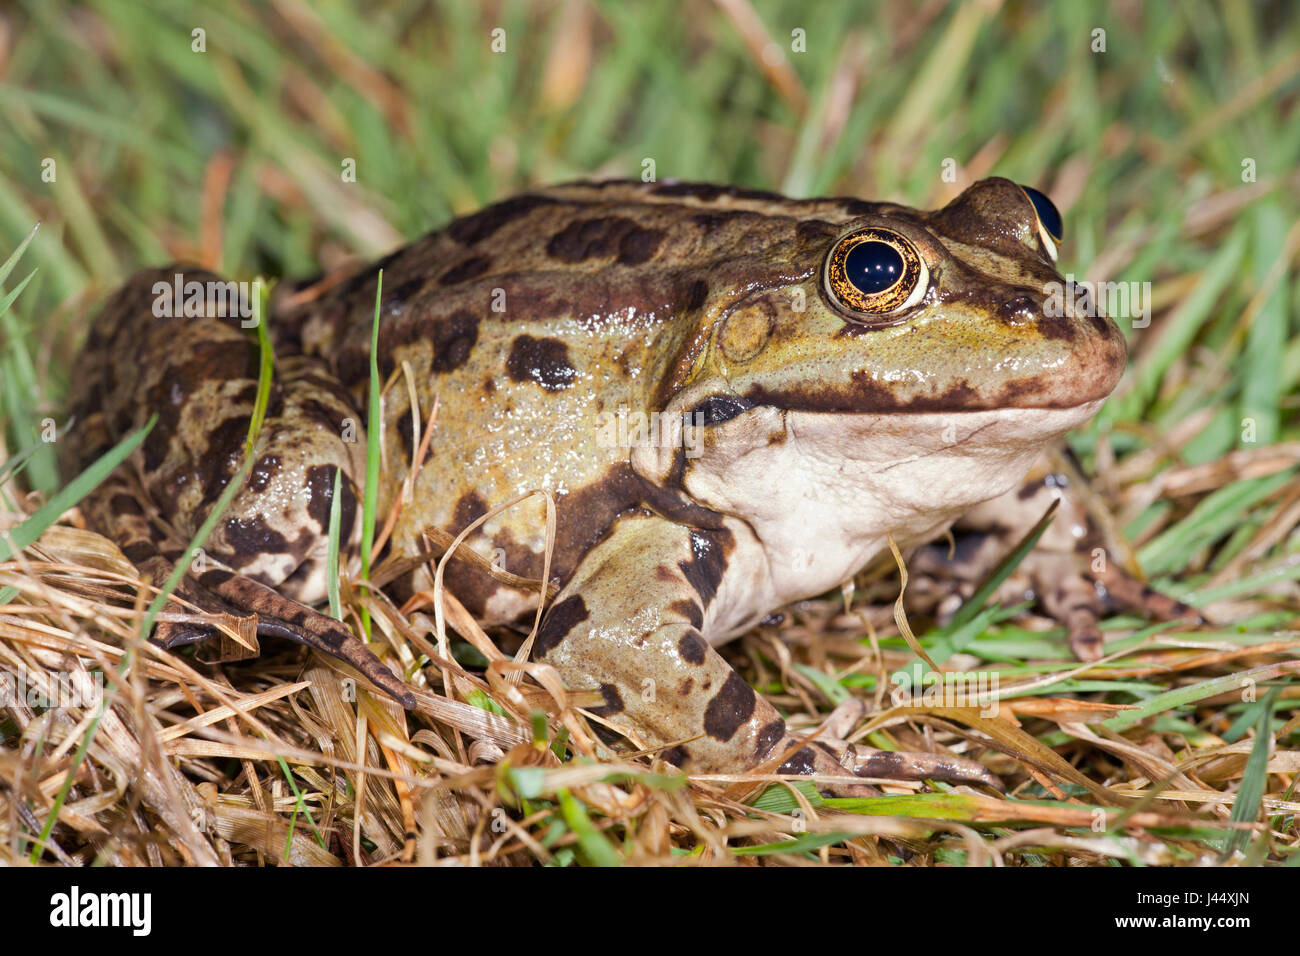 photo of a large marsh frog in grass Stock Photo